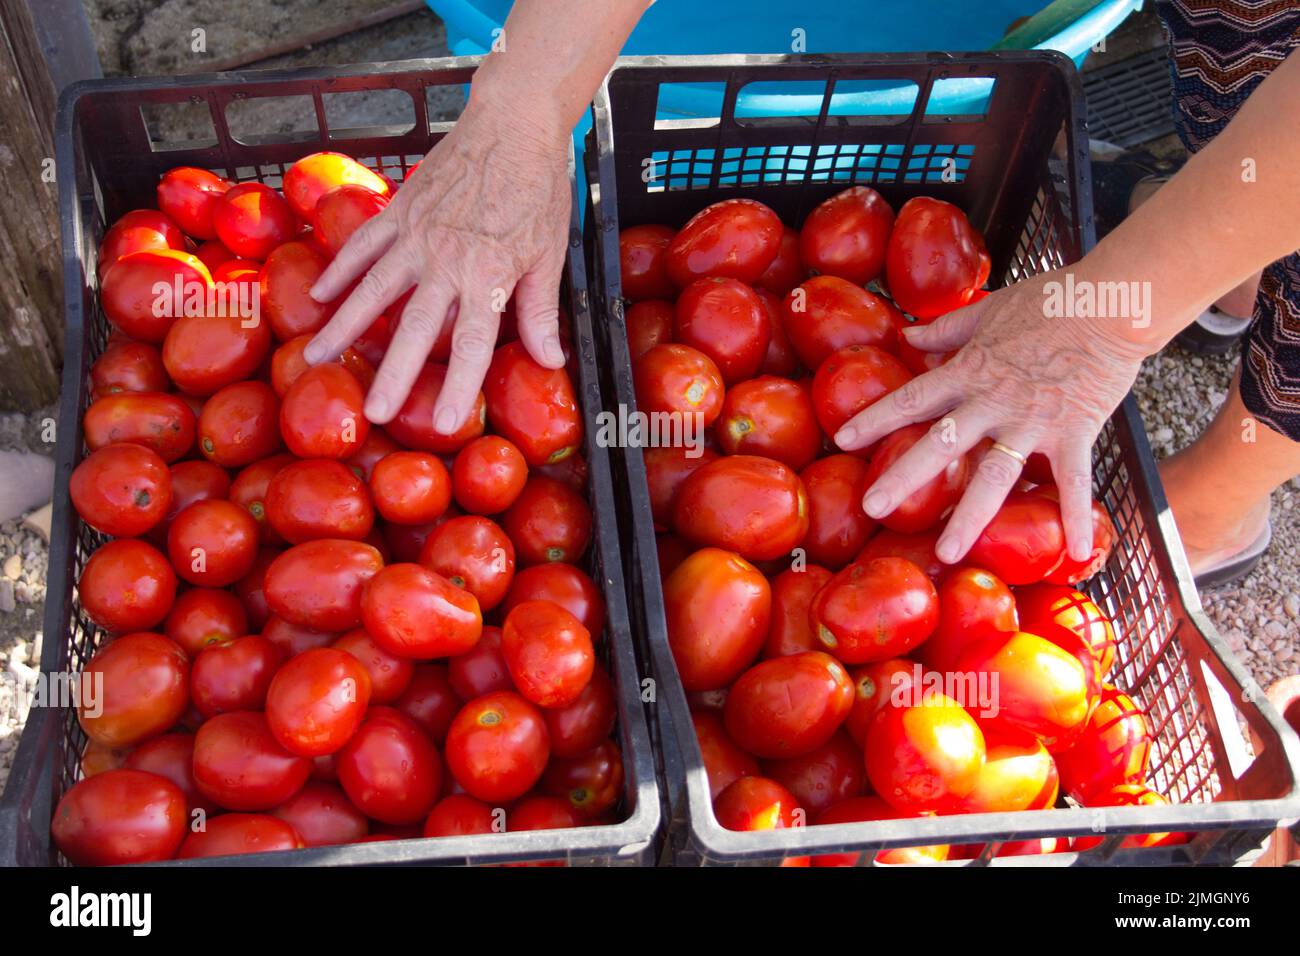 Image of a woman's hands arranging tomatoes into crates. Preparation for the tomato puree Stock Photo